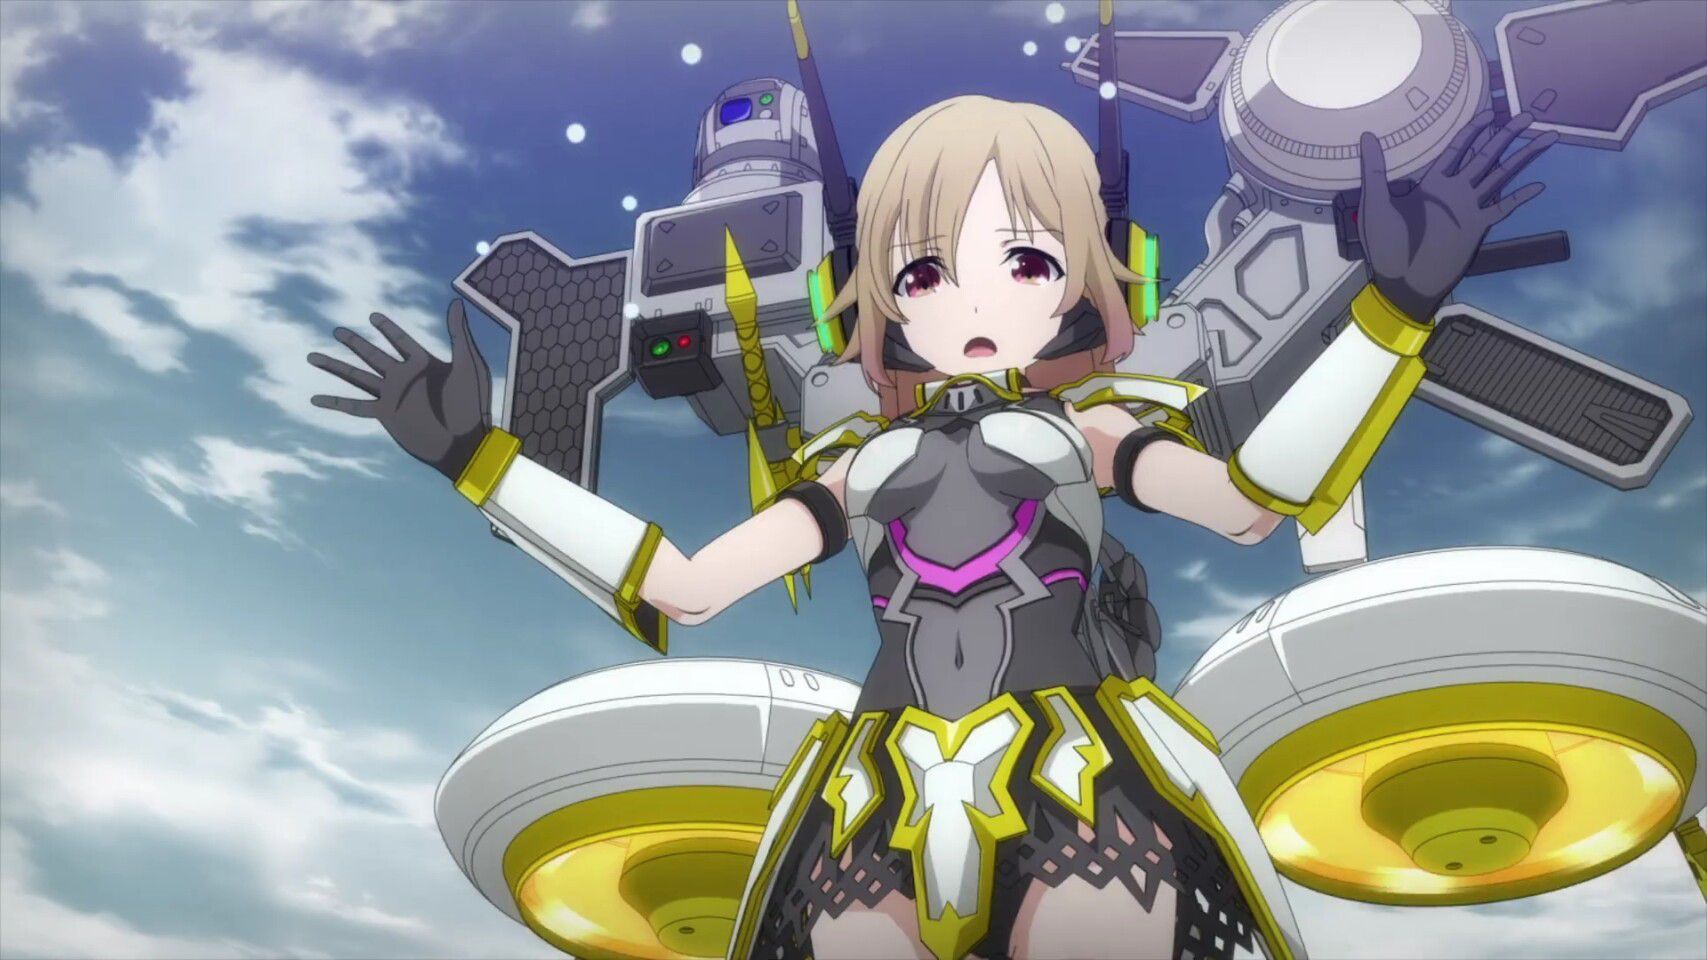 Anime [Armored Daughter Fighting Machine] erotic bathing scenes and pants full-size costumes of girls! January broadcasting starts 10